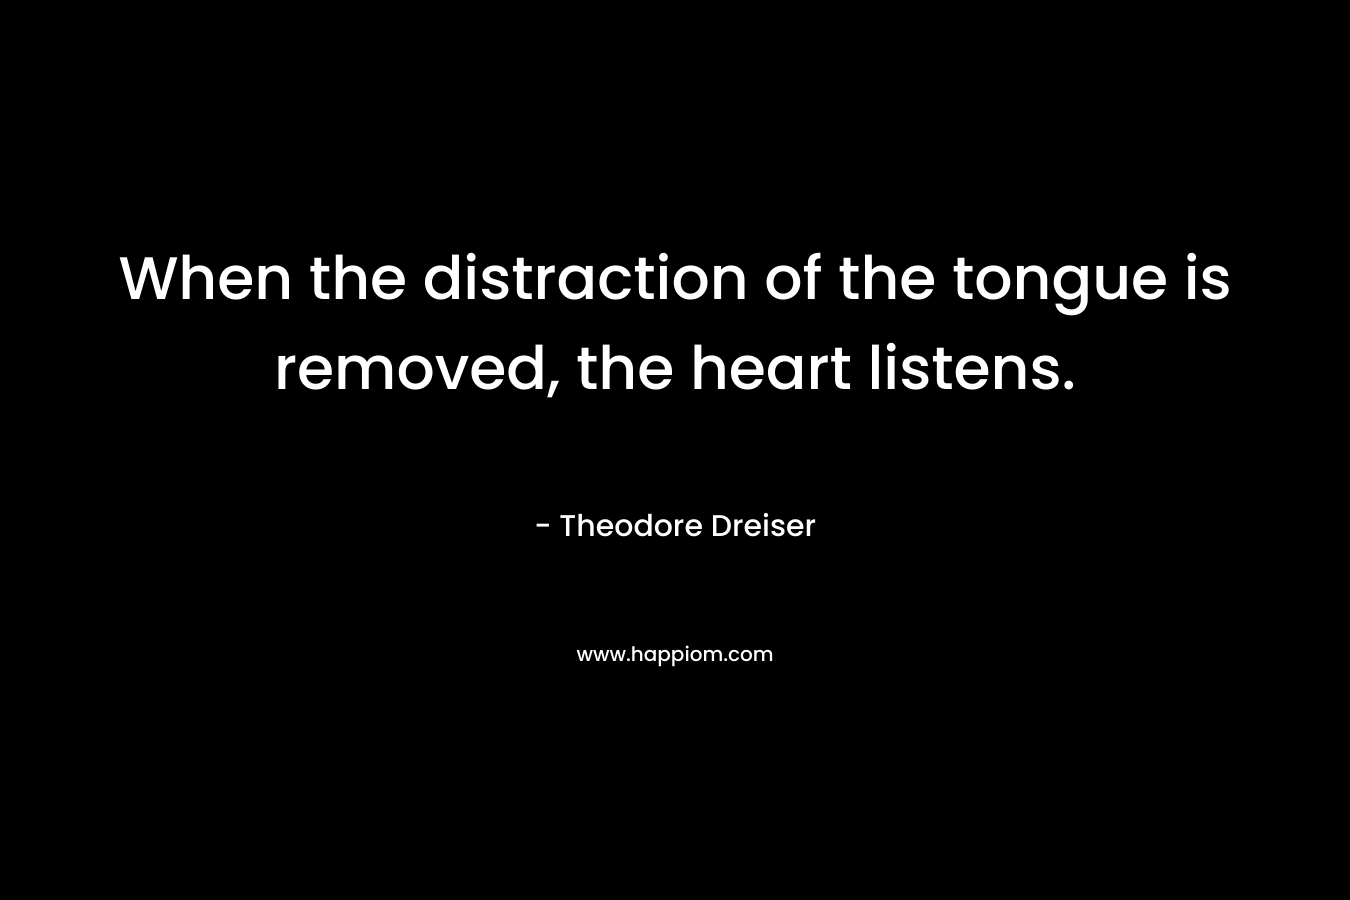 When the distraction of the tongue is removed, the heart listens. – Theodore Dreiser